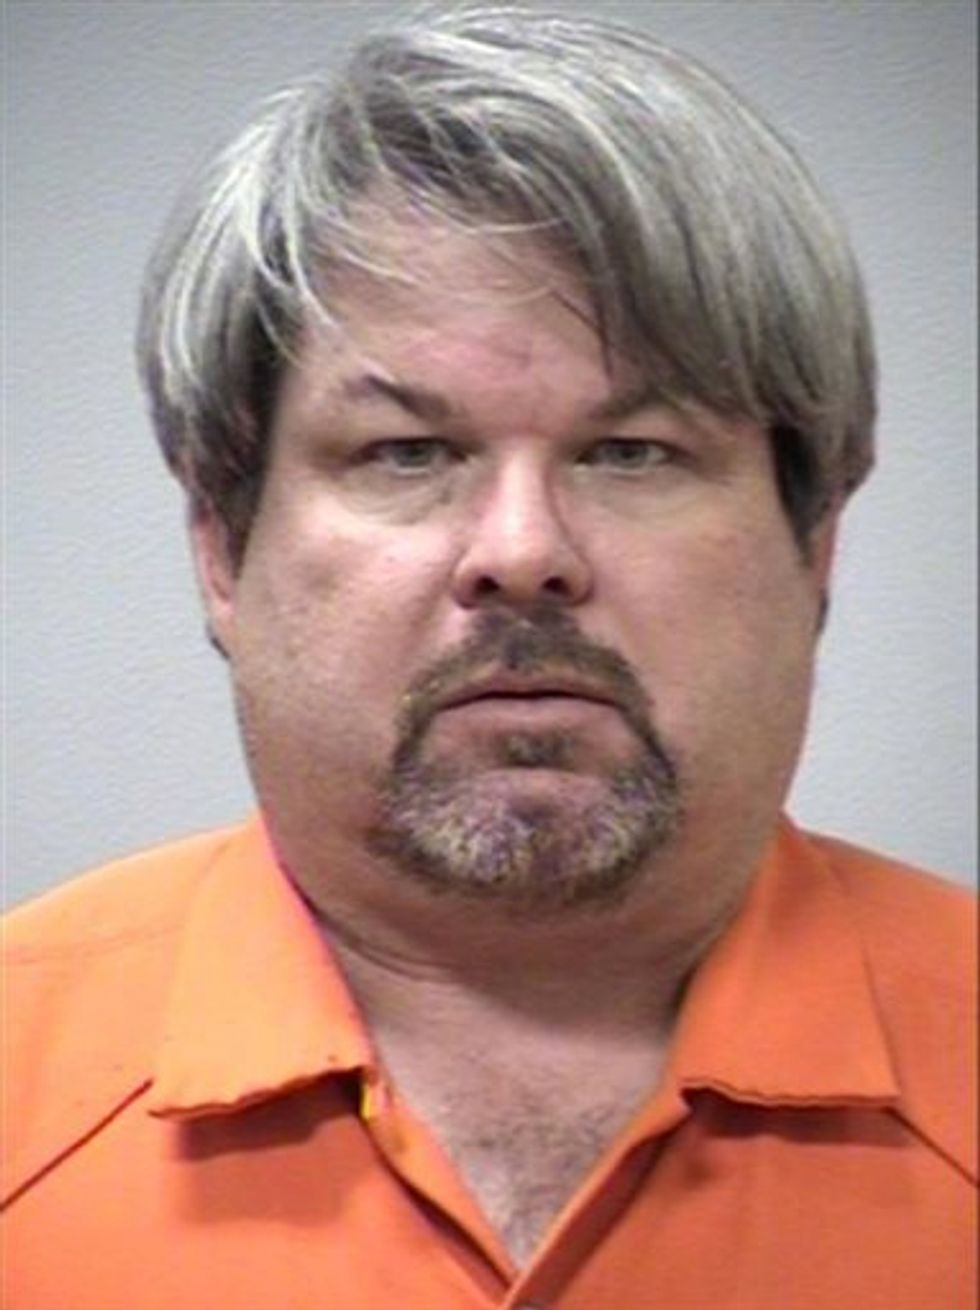 New Details Only Deepen Mystery Surrounding Kalamazoo Shootings